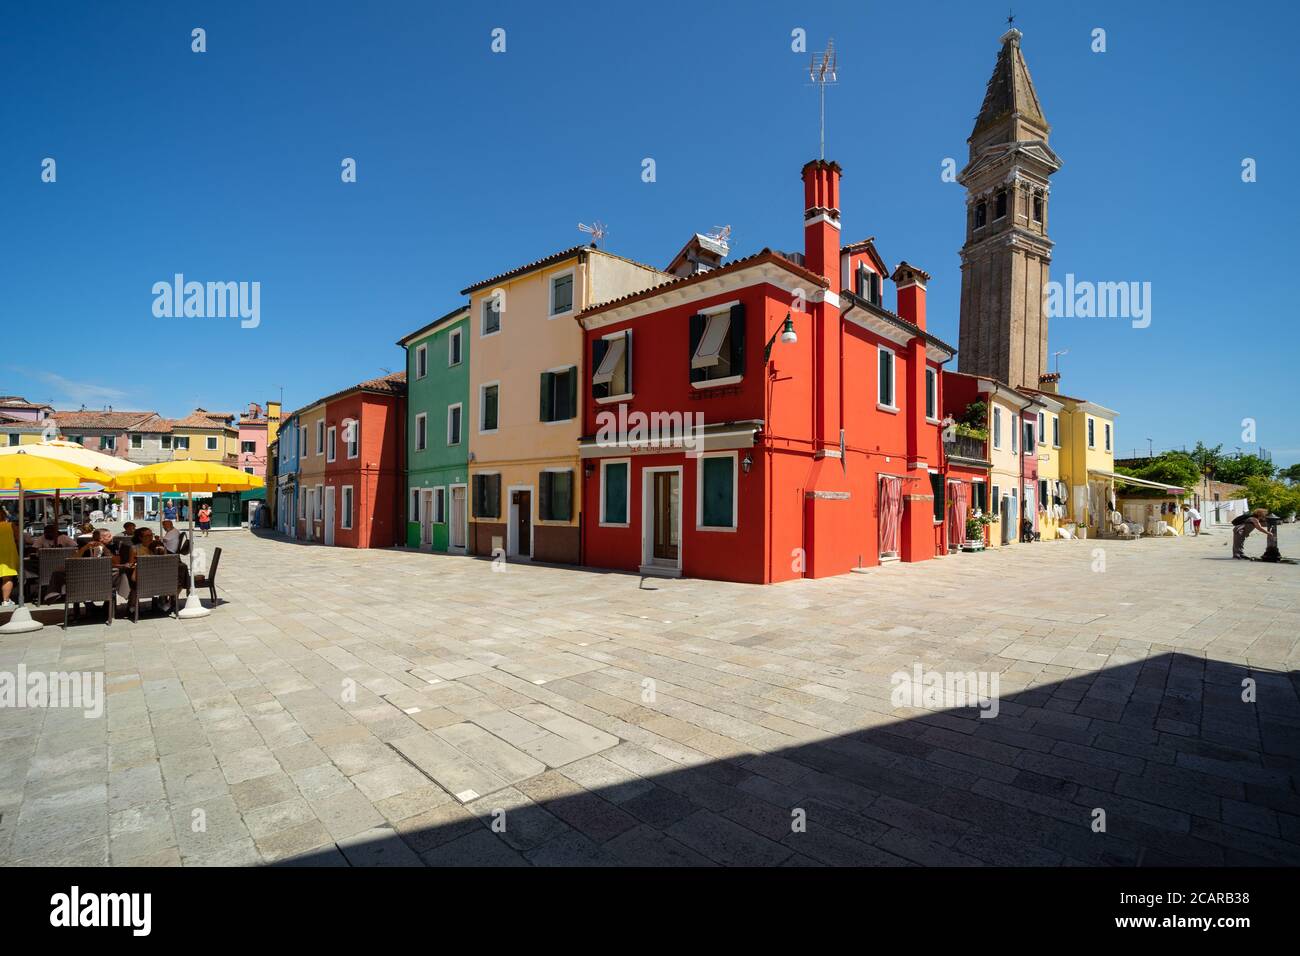 Burano island, Venetian Lagoon, Venice, Italy, central square with coloured homes, outdoor bars, and the leaning tower of the San Martino church Stock Photo